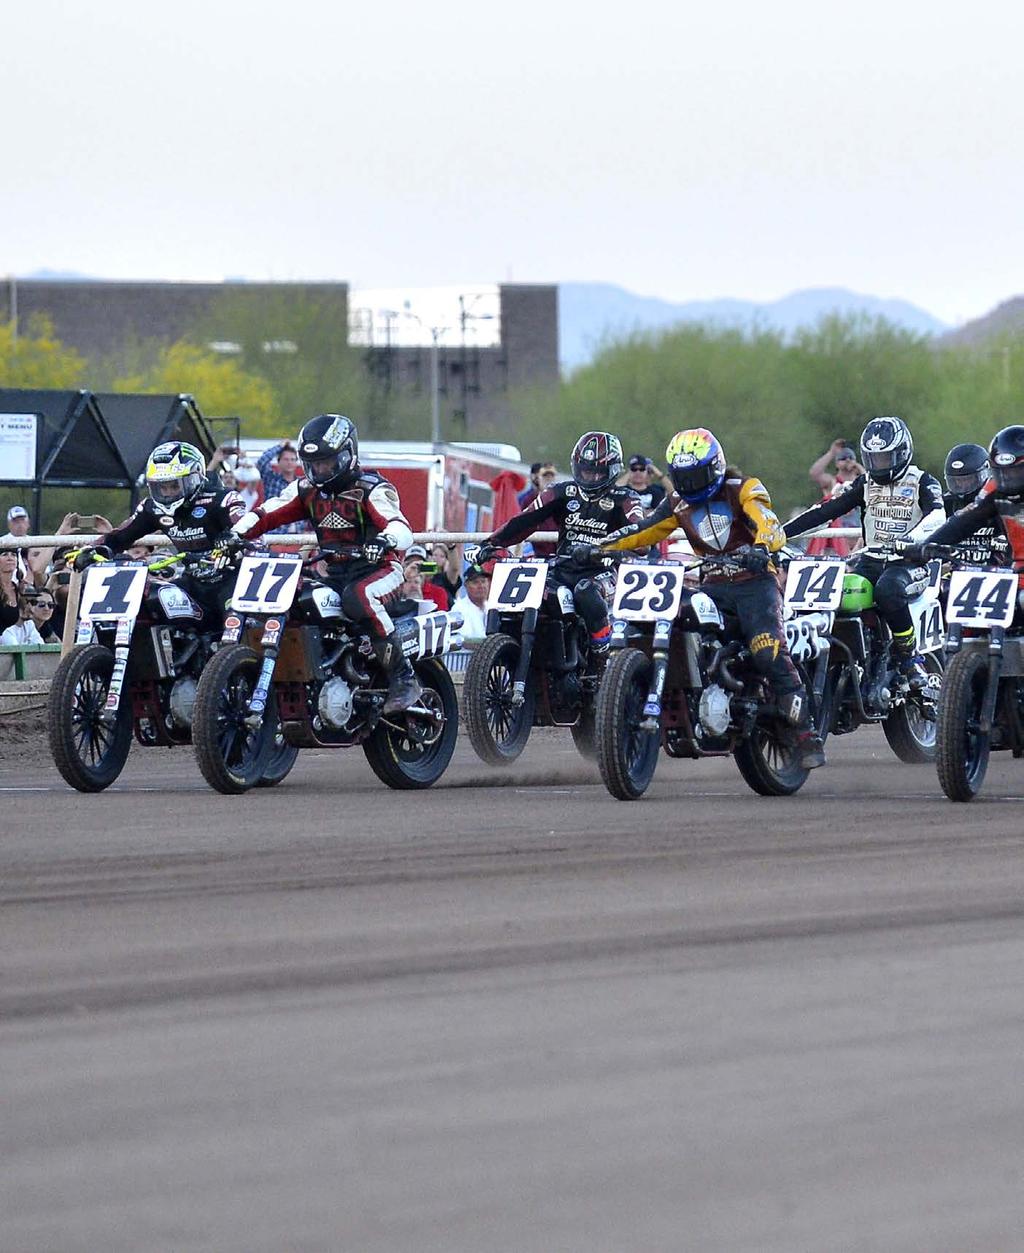 ROUND 5 / MAY 13, 2018 TURF PARADISE / PHOENIX, ARIZONA FLAT TRACK 2018 AMERICAN FLAT TRACK SERIES P62 Mees Breezes Jared Mees scores wire-to-wire win BY DAVE HOENIG PHOTOGRAPHY BY